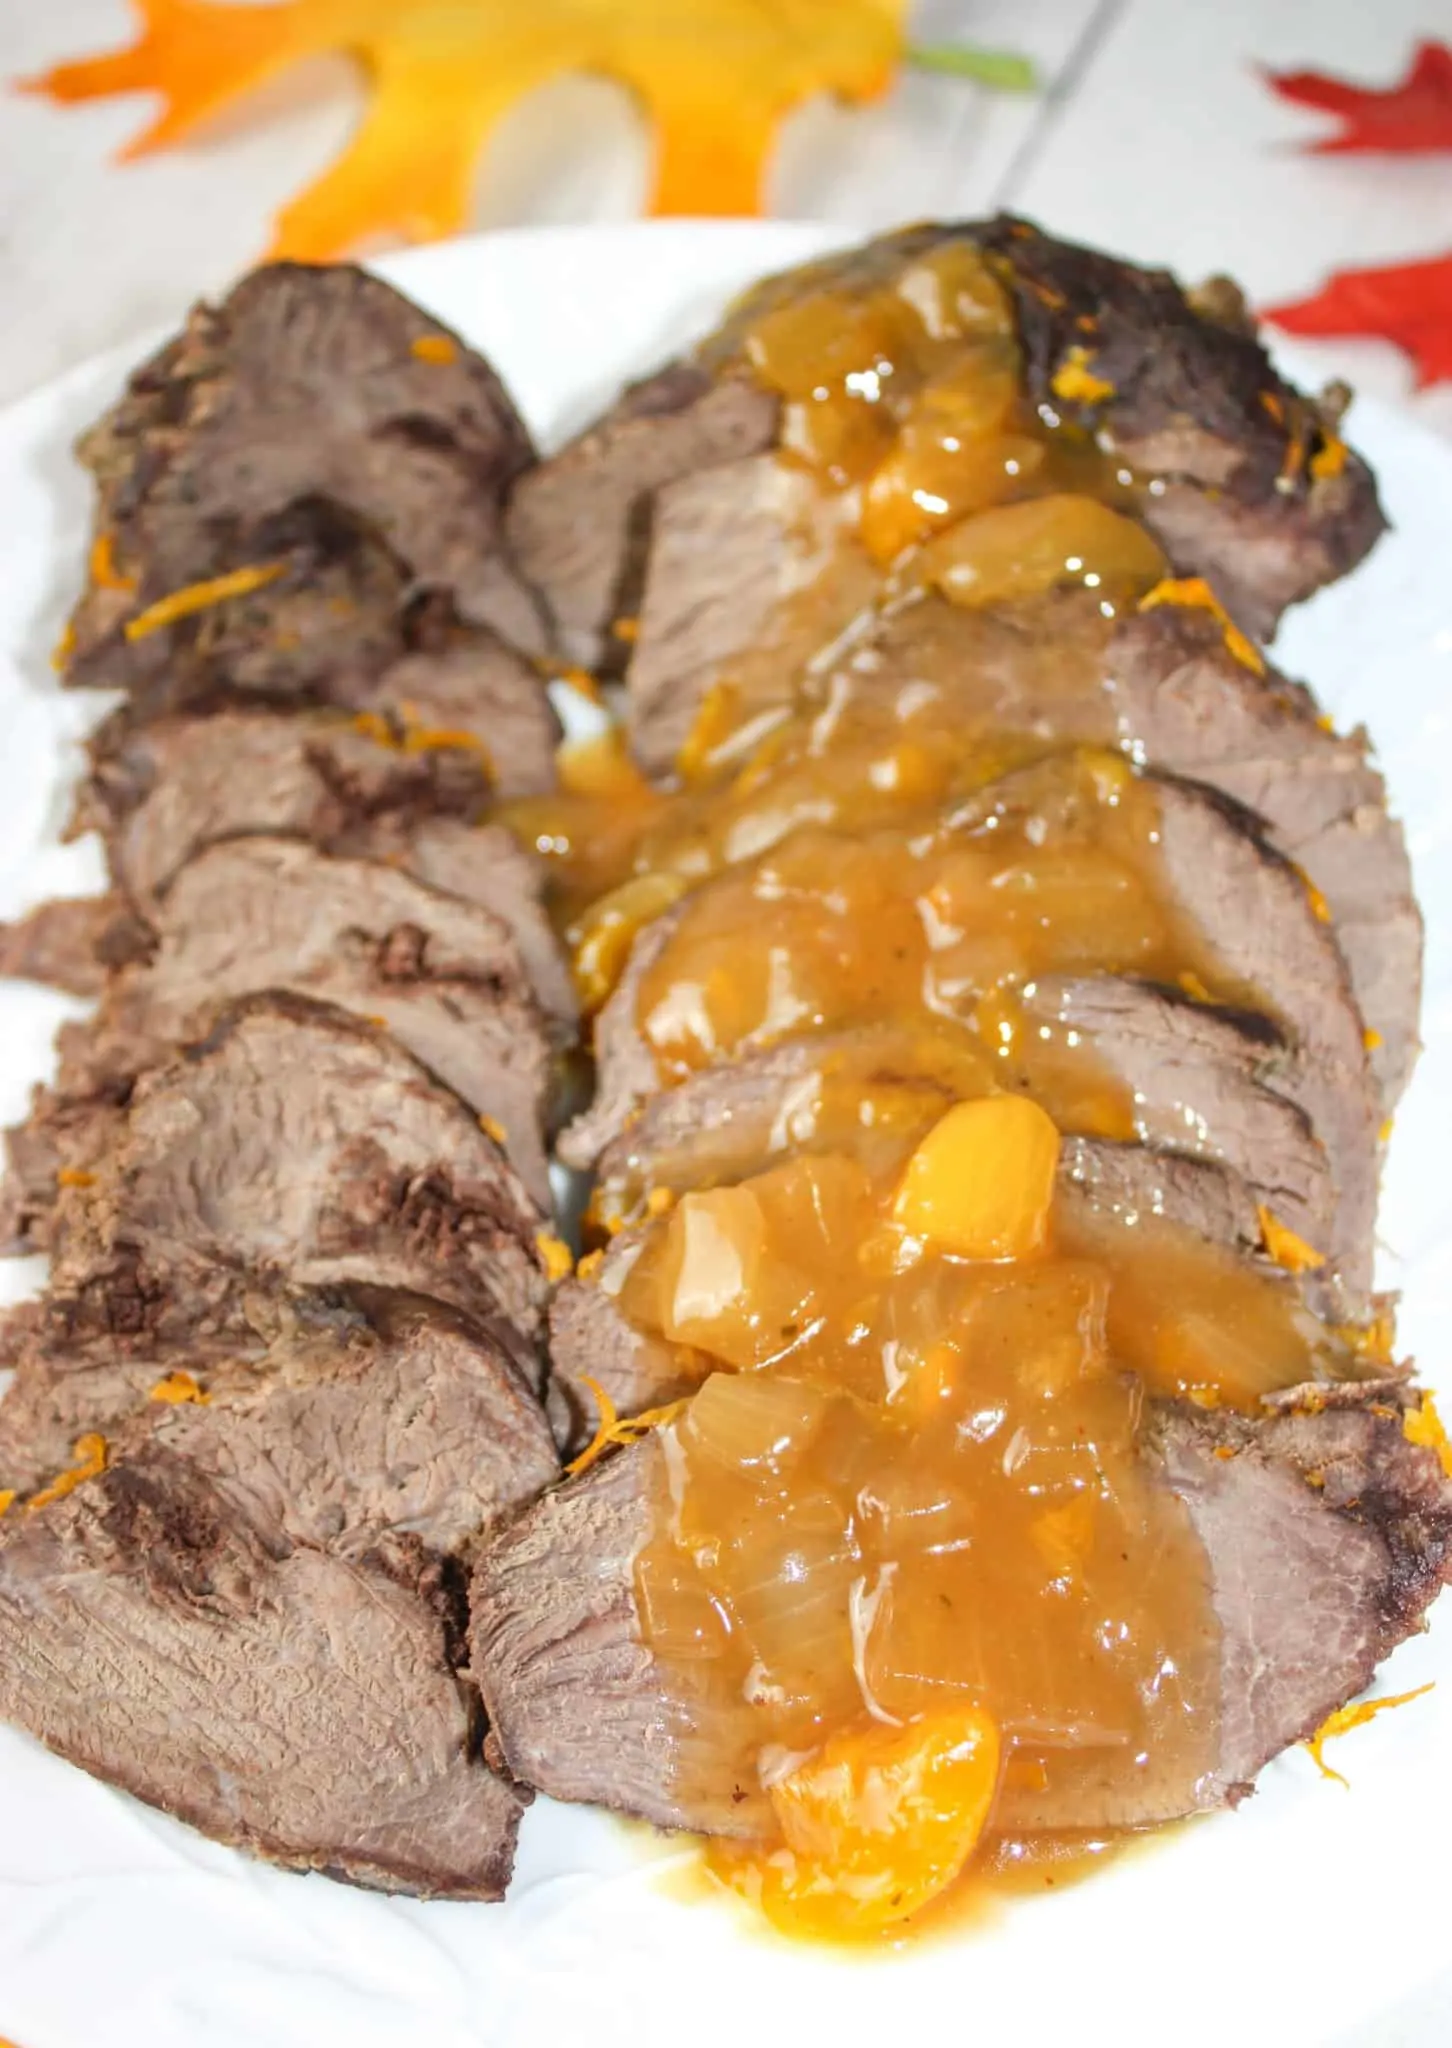 Savoury orange sauce loaded, with flavour and mandarin orange pieces, top off these Instant Pot Wild Goose Breasts. This easy pressure cooker recipe cooks the goose breasts to perfection.